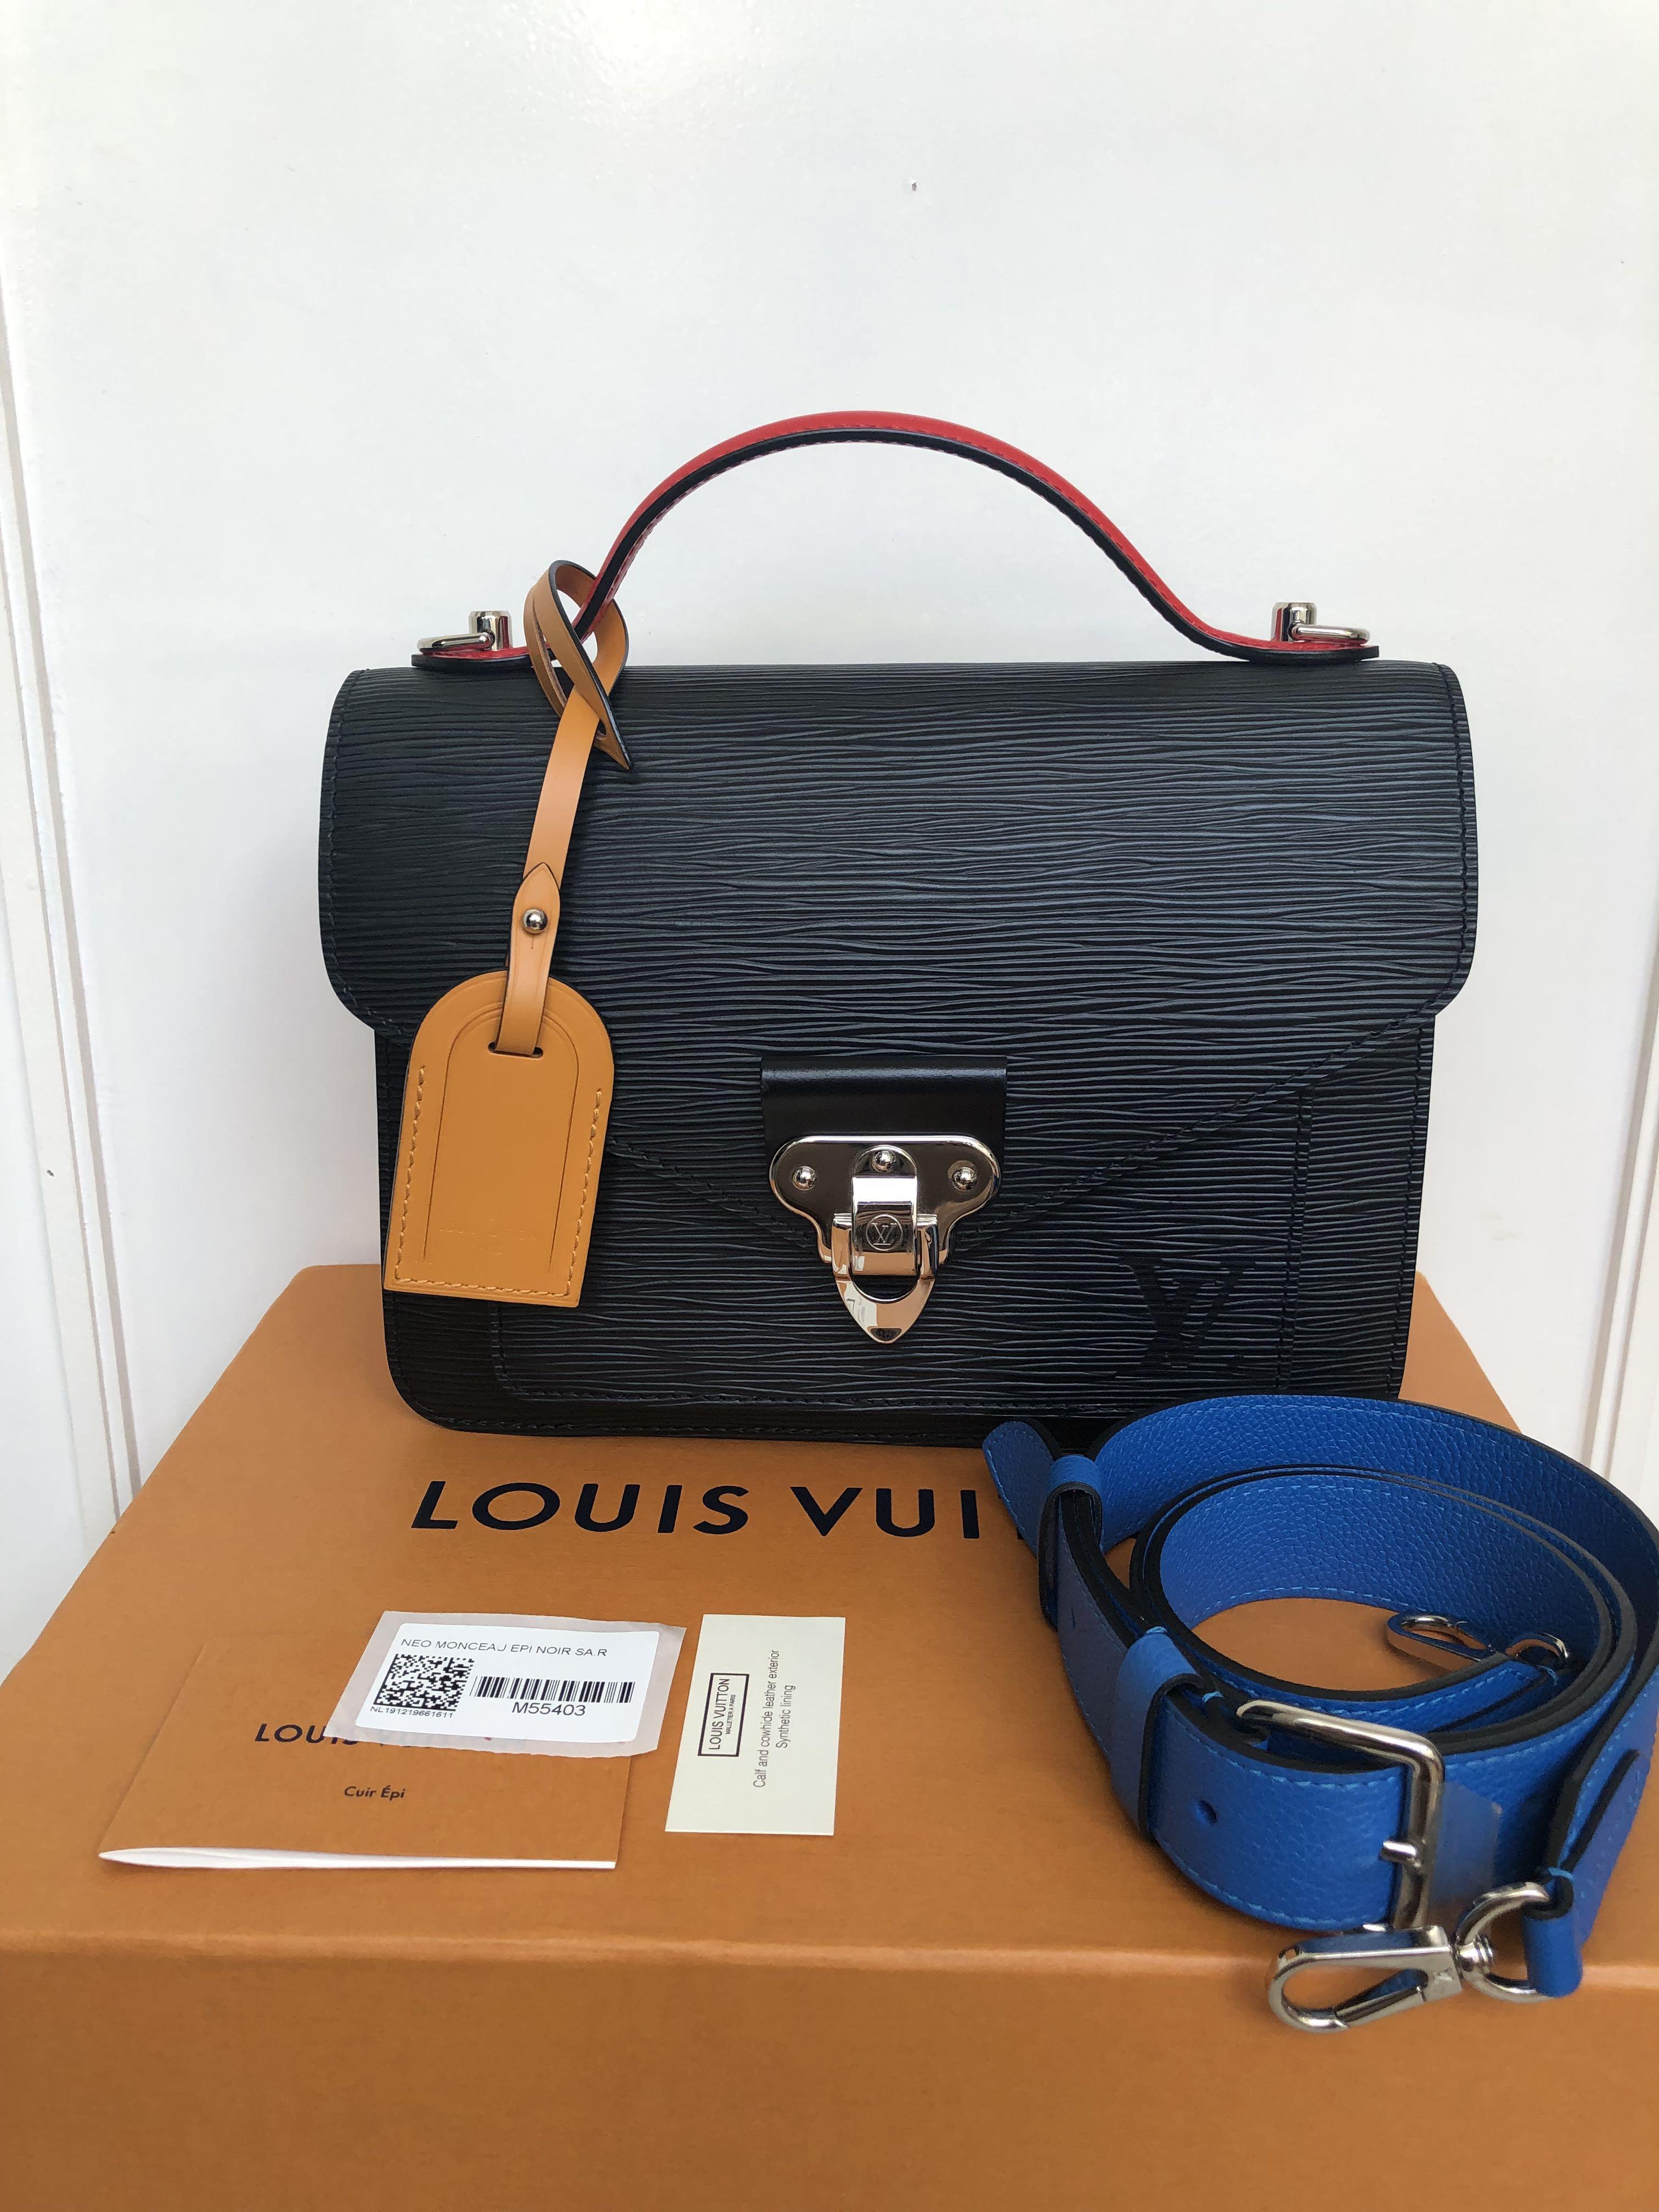 Excellent Condition*- Louis Vuitton Neo Monceau Epi for sale!, Women's  Fashion, Bags & Wallets, Cross-body Bags on Carousell